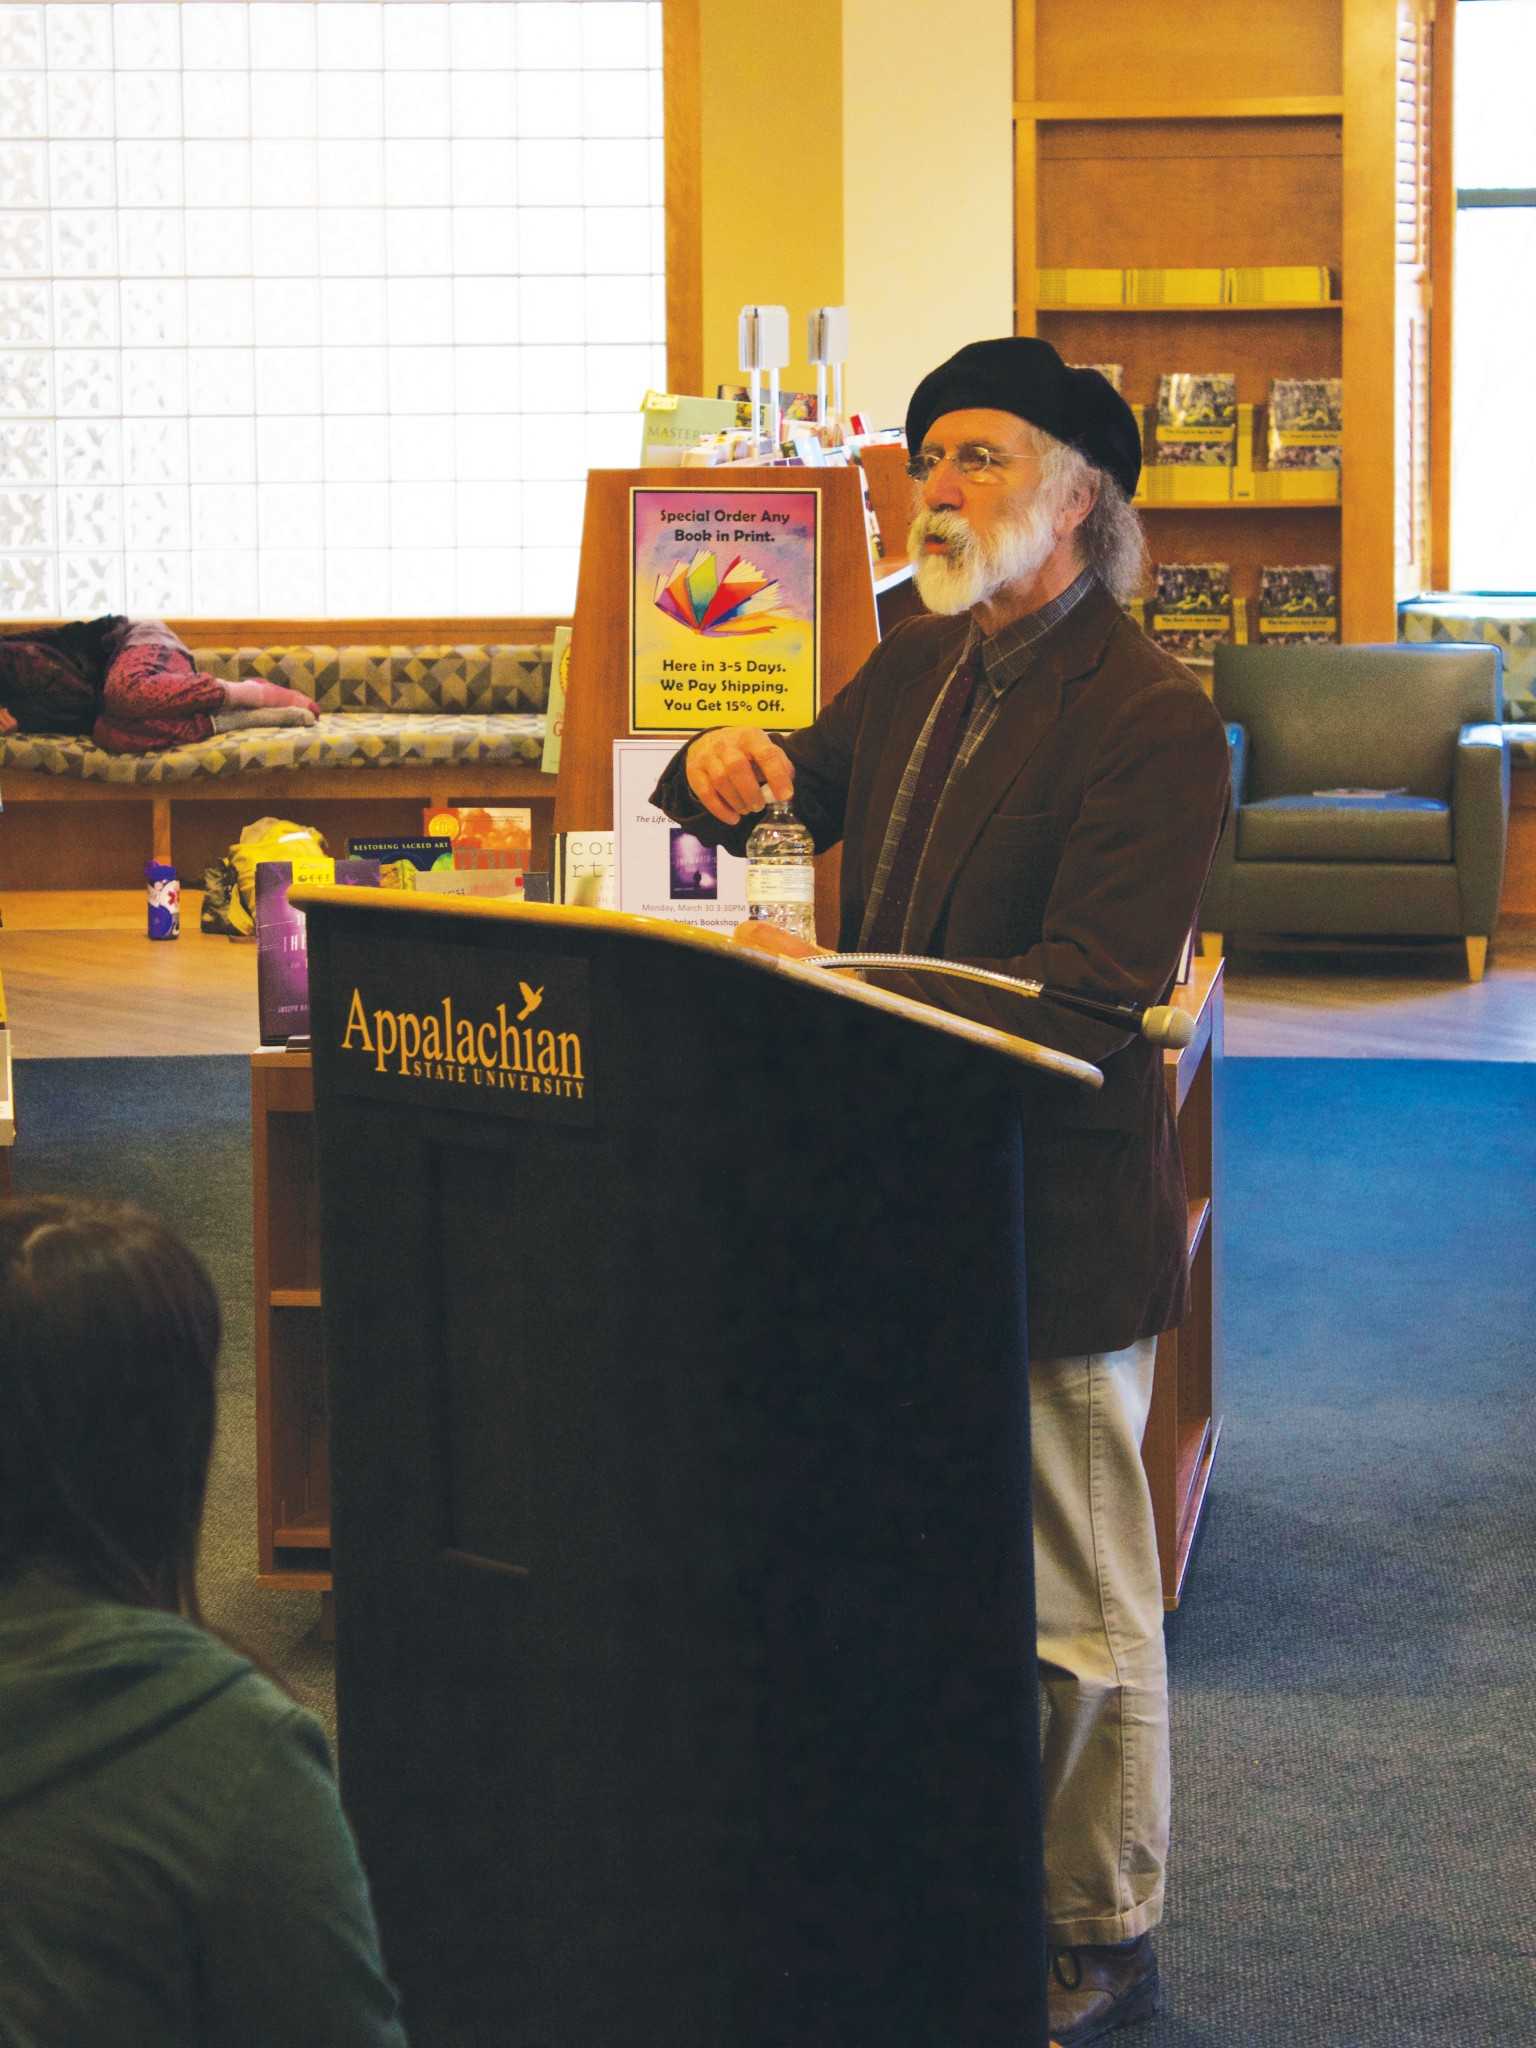 Appalachian State University English professor Joseph Bathanti held a book signing in the university bookstore on Monday for his recently released book, The Life of the World to Come.